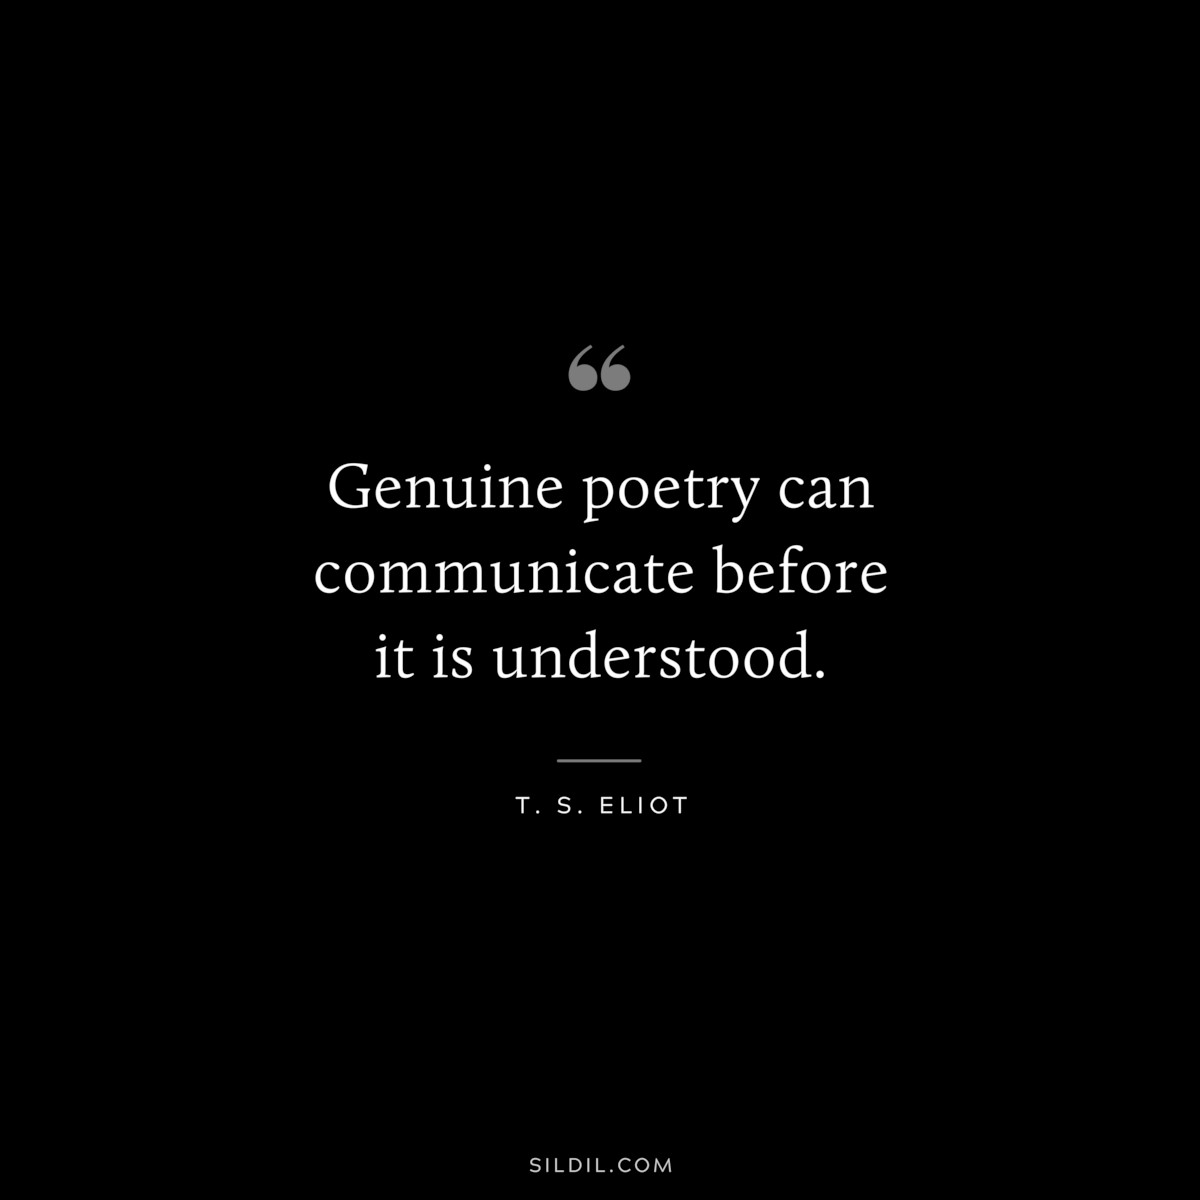 Genuine poetry can communicate before it is understood. ― T. S. Eliot